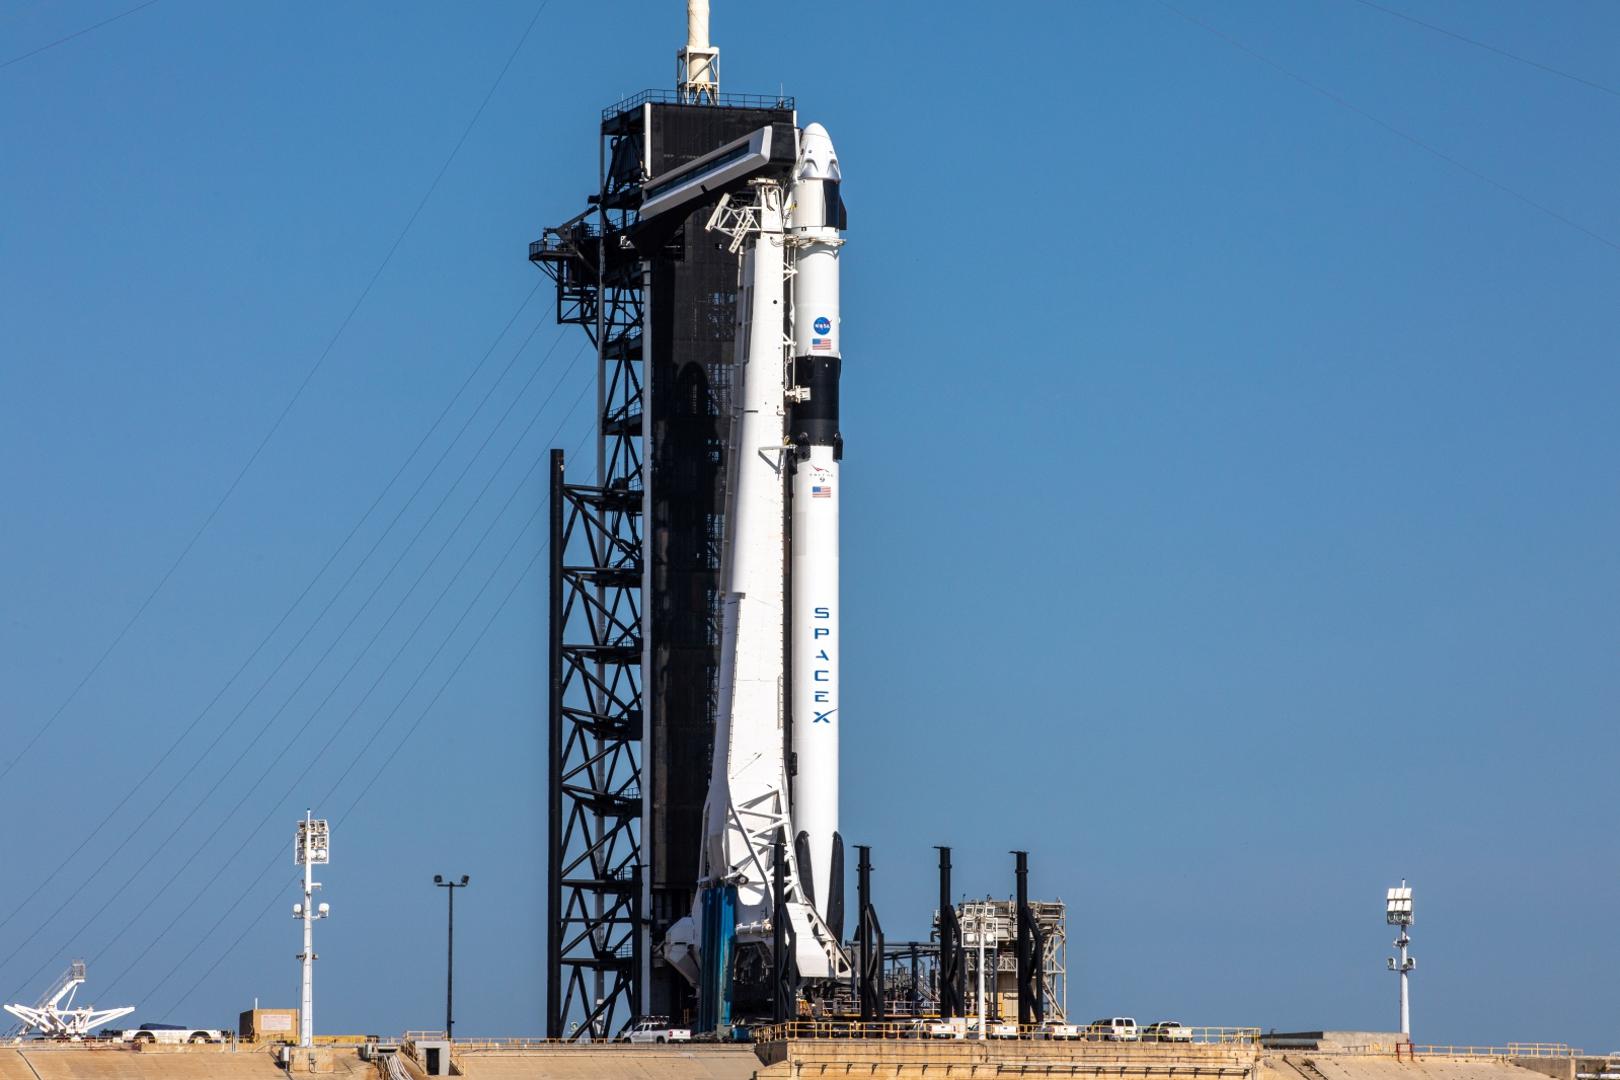 A SpaceX Falcon 9 rocket, with the Crew Dragon atop, stands poised for launch at historic Launch Complex 39A, ahead of NASA's SpaceX Demo-2 mission, at NASA's Kennedy Space Center in Florida A SpaceX Falcon 9 rocket, with the Crew Dragon atop, stands poised for launch at historic Launch Complex 39A, ahead of NASA's SpaceX Demo-2 mission, at NASA's Kennedy Space Center in Florida, U.S., May 21, 2020. Picture taken May 21, 2020. NASA/KENNEDY SPACE CENTER/Kim Shiflett /Handout via REUTERS  THIS IMAGE HAS BEEN SUPPLIED BY A THIRD PARTY. MANDATORY CREDIT NASA/KENNEDY SPACE CENTER